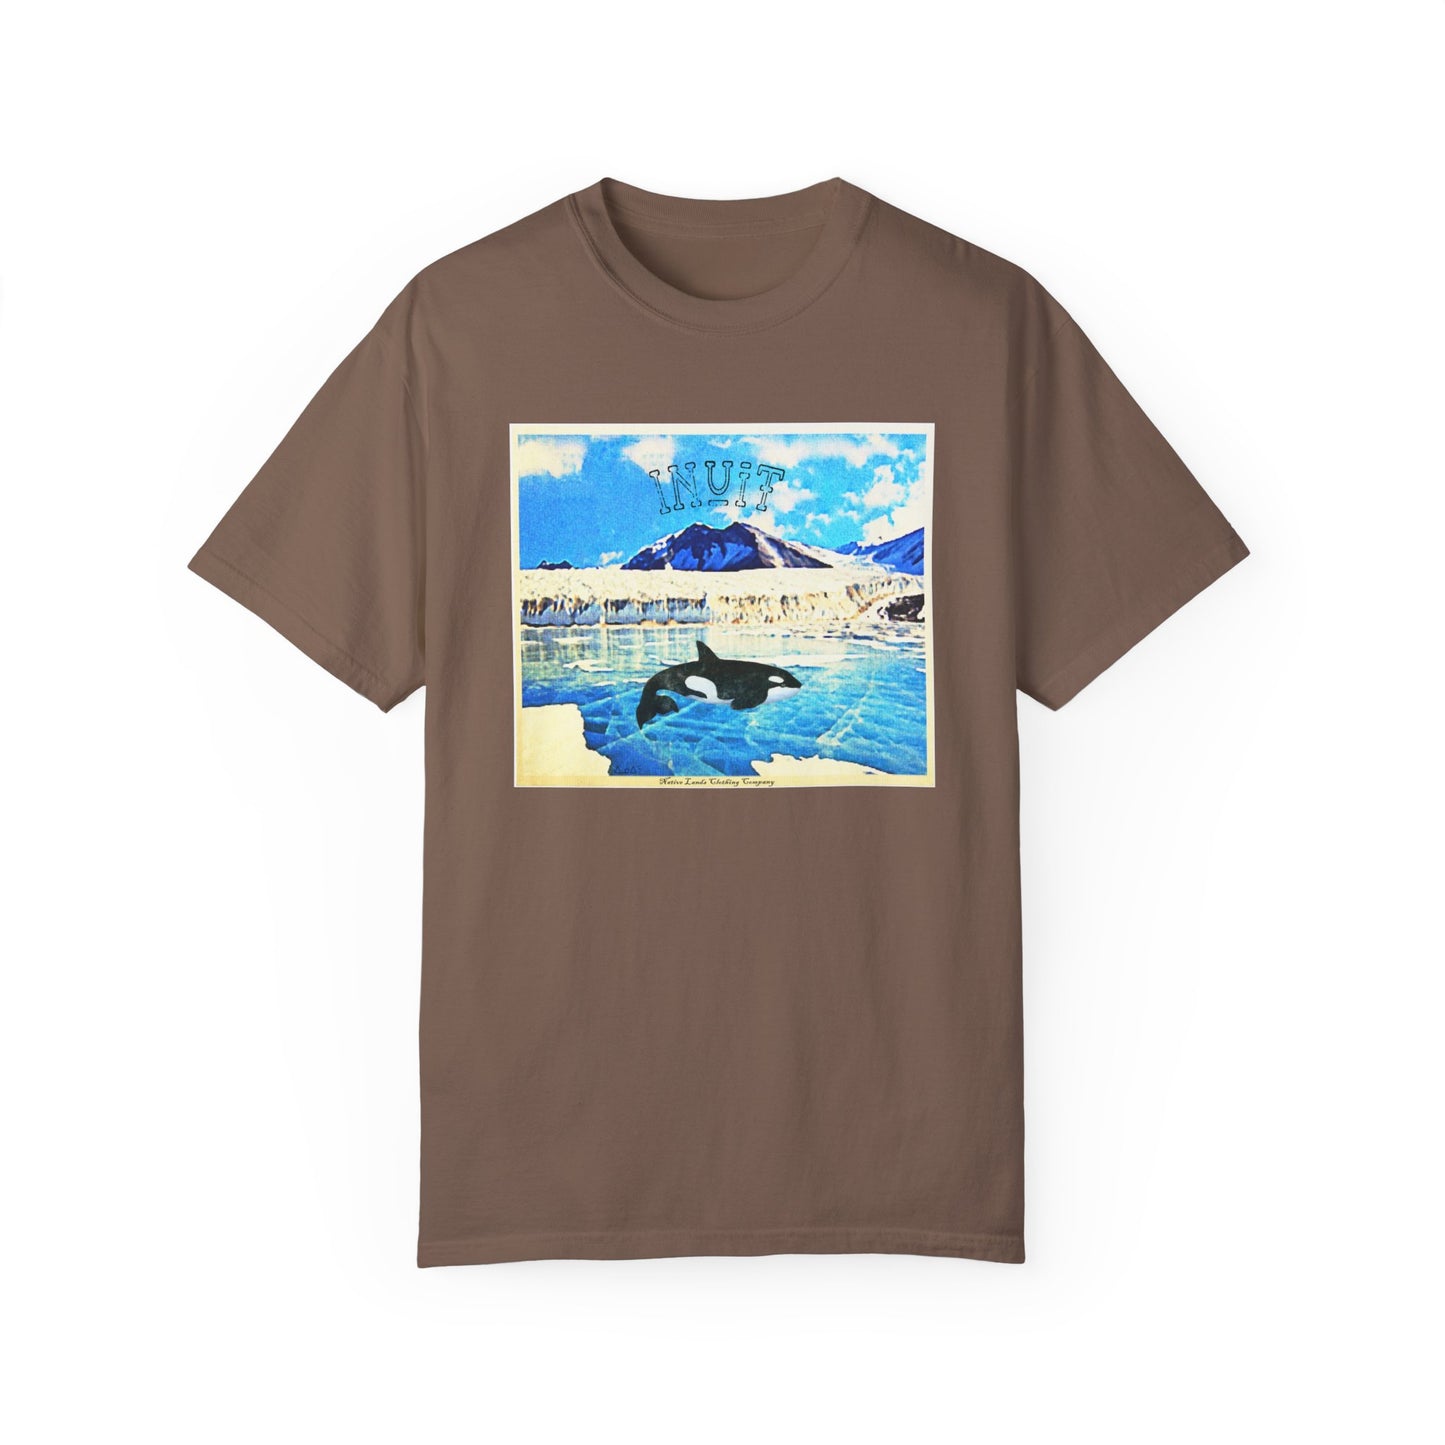 Inuit Tribe Garment-Dyed Shirt Orca Cotton Native American